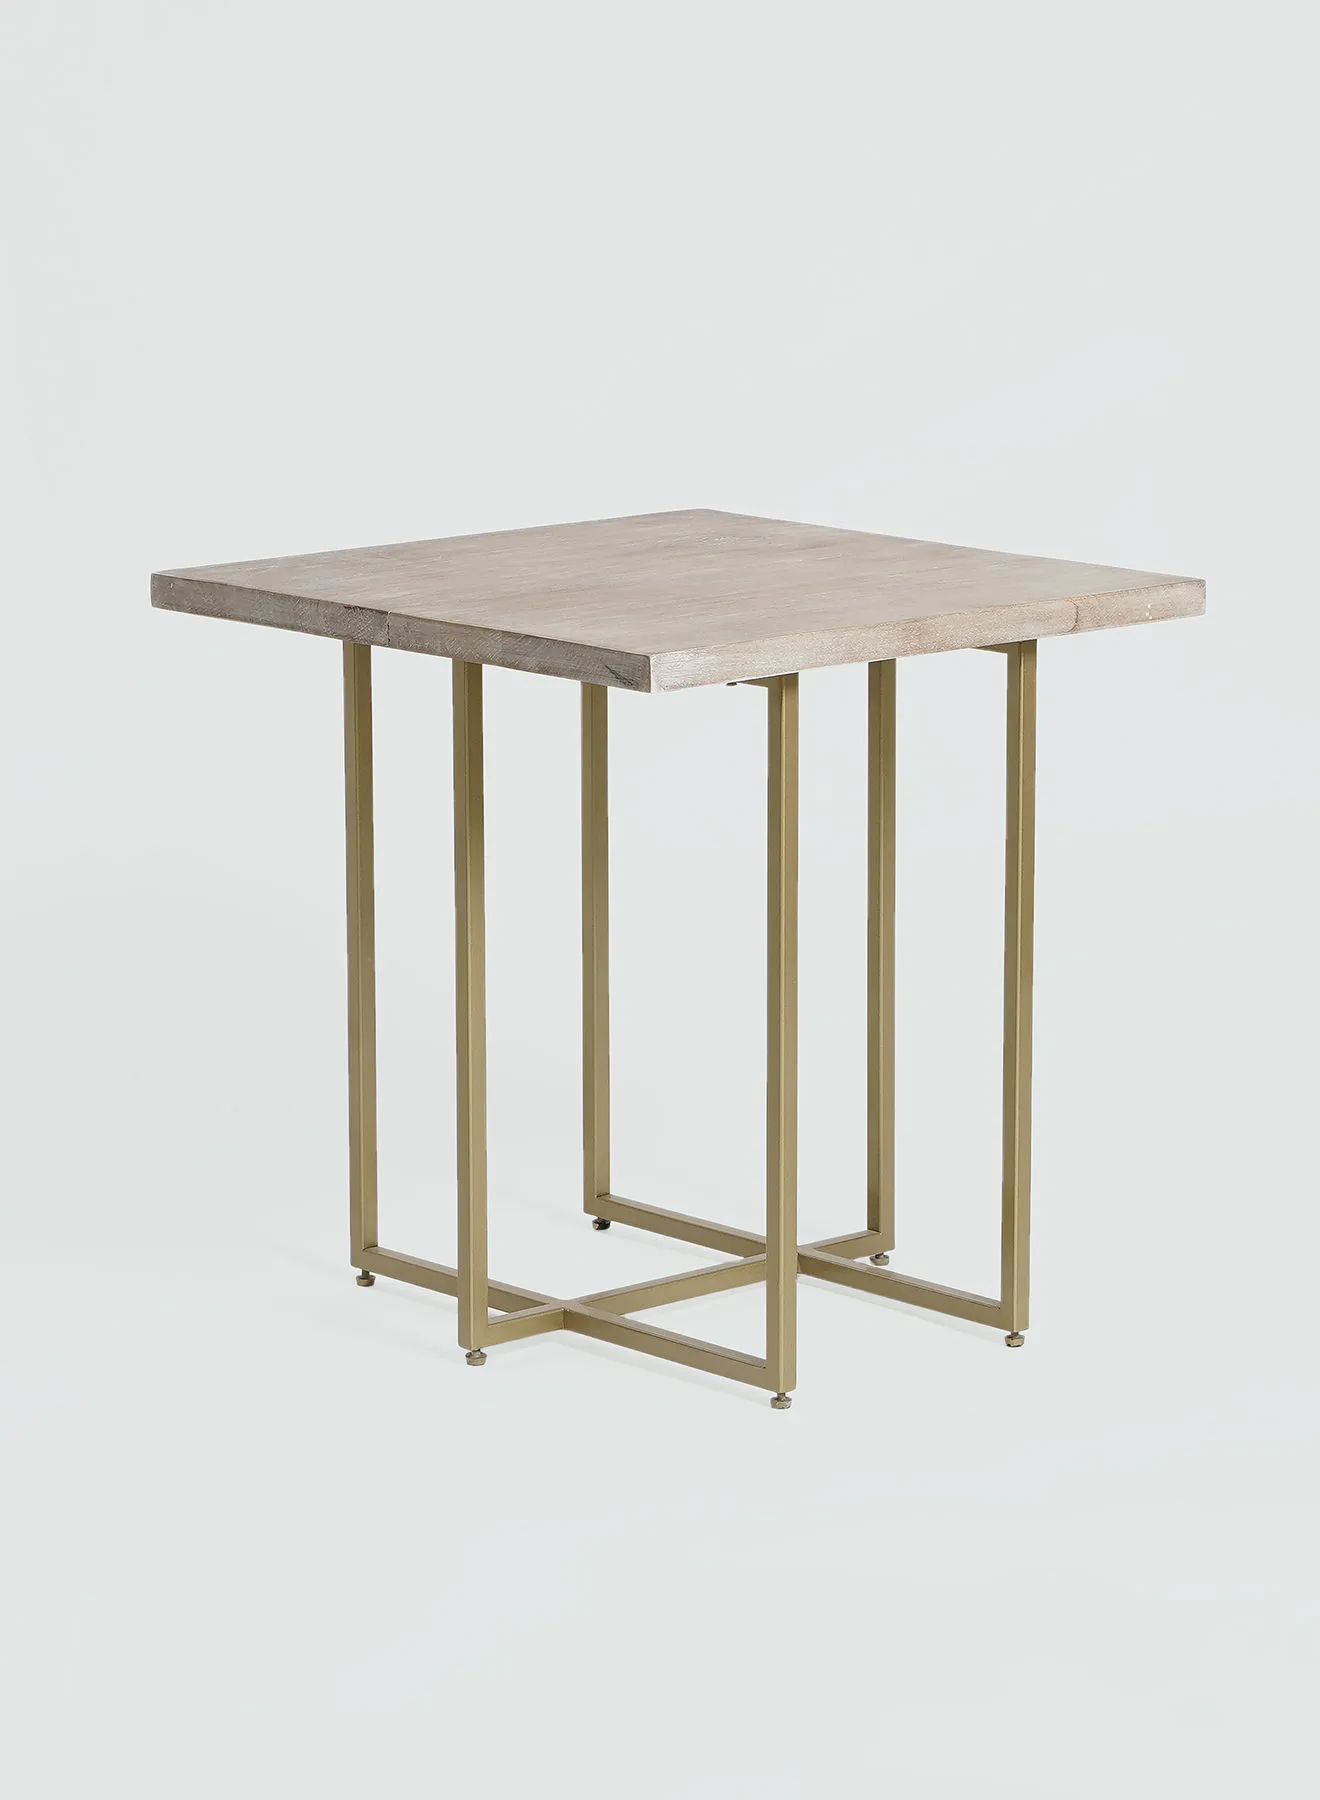 ebb & flow Side Table Luxurious - In Gold/Natural Wood - Used Next To Sofa As Coffee Corner